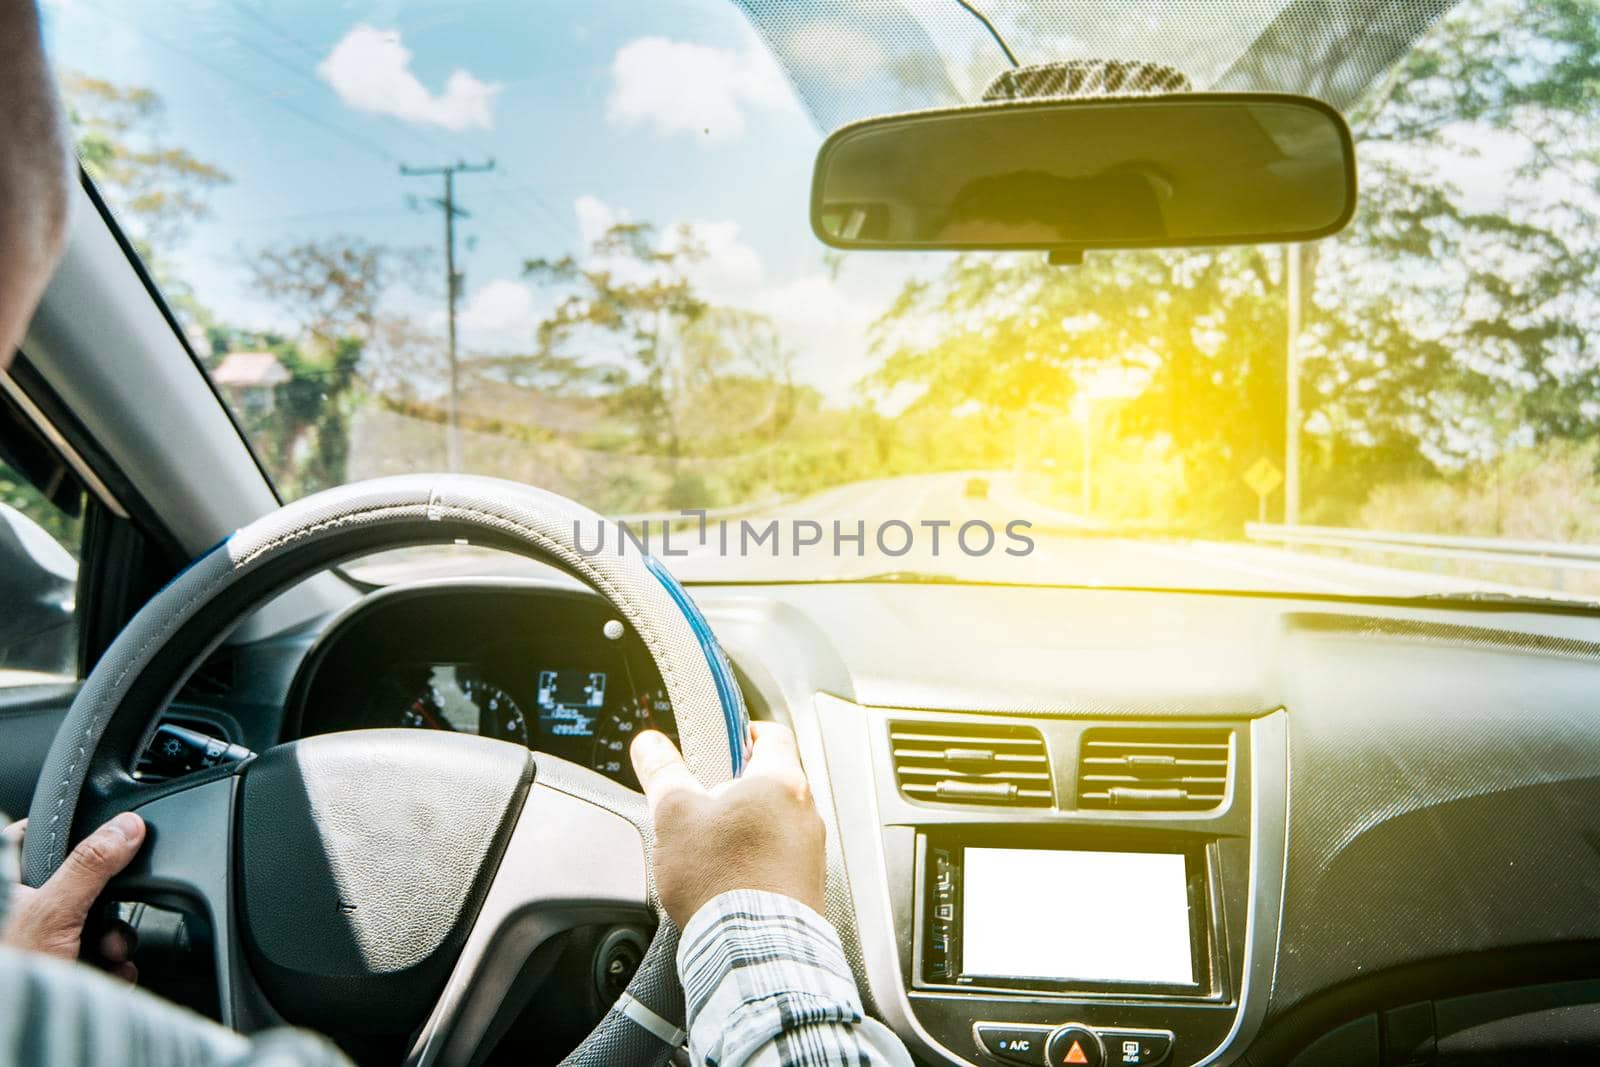 Concept of hands on the wheel of a car, Man's hands on the wheel of the car, Close up of person driving with hands on the wheel, inside view of a man driving a car